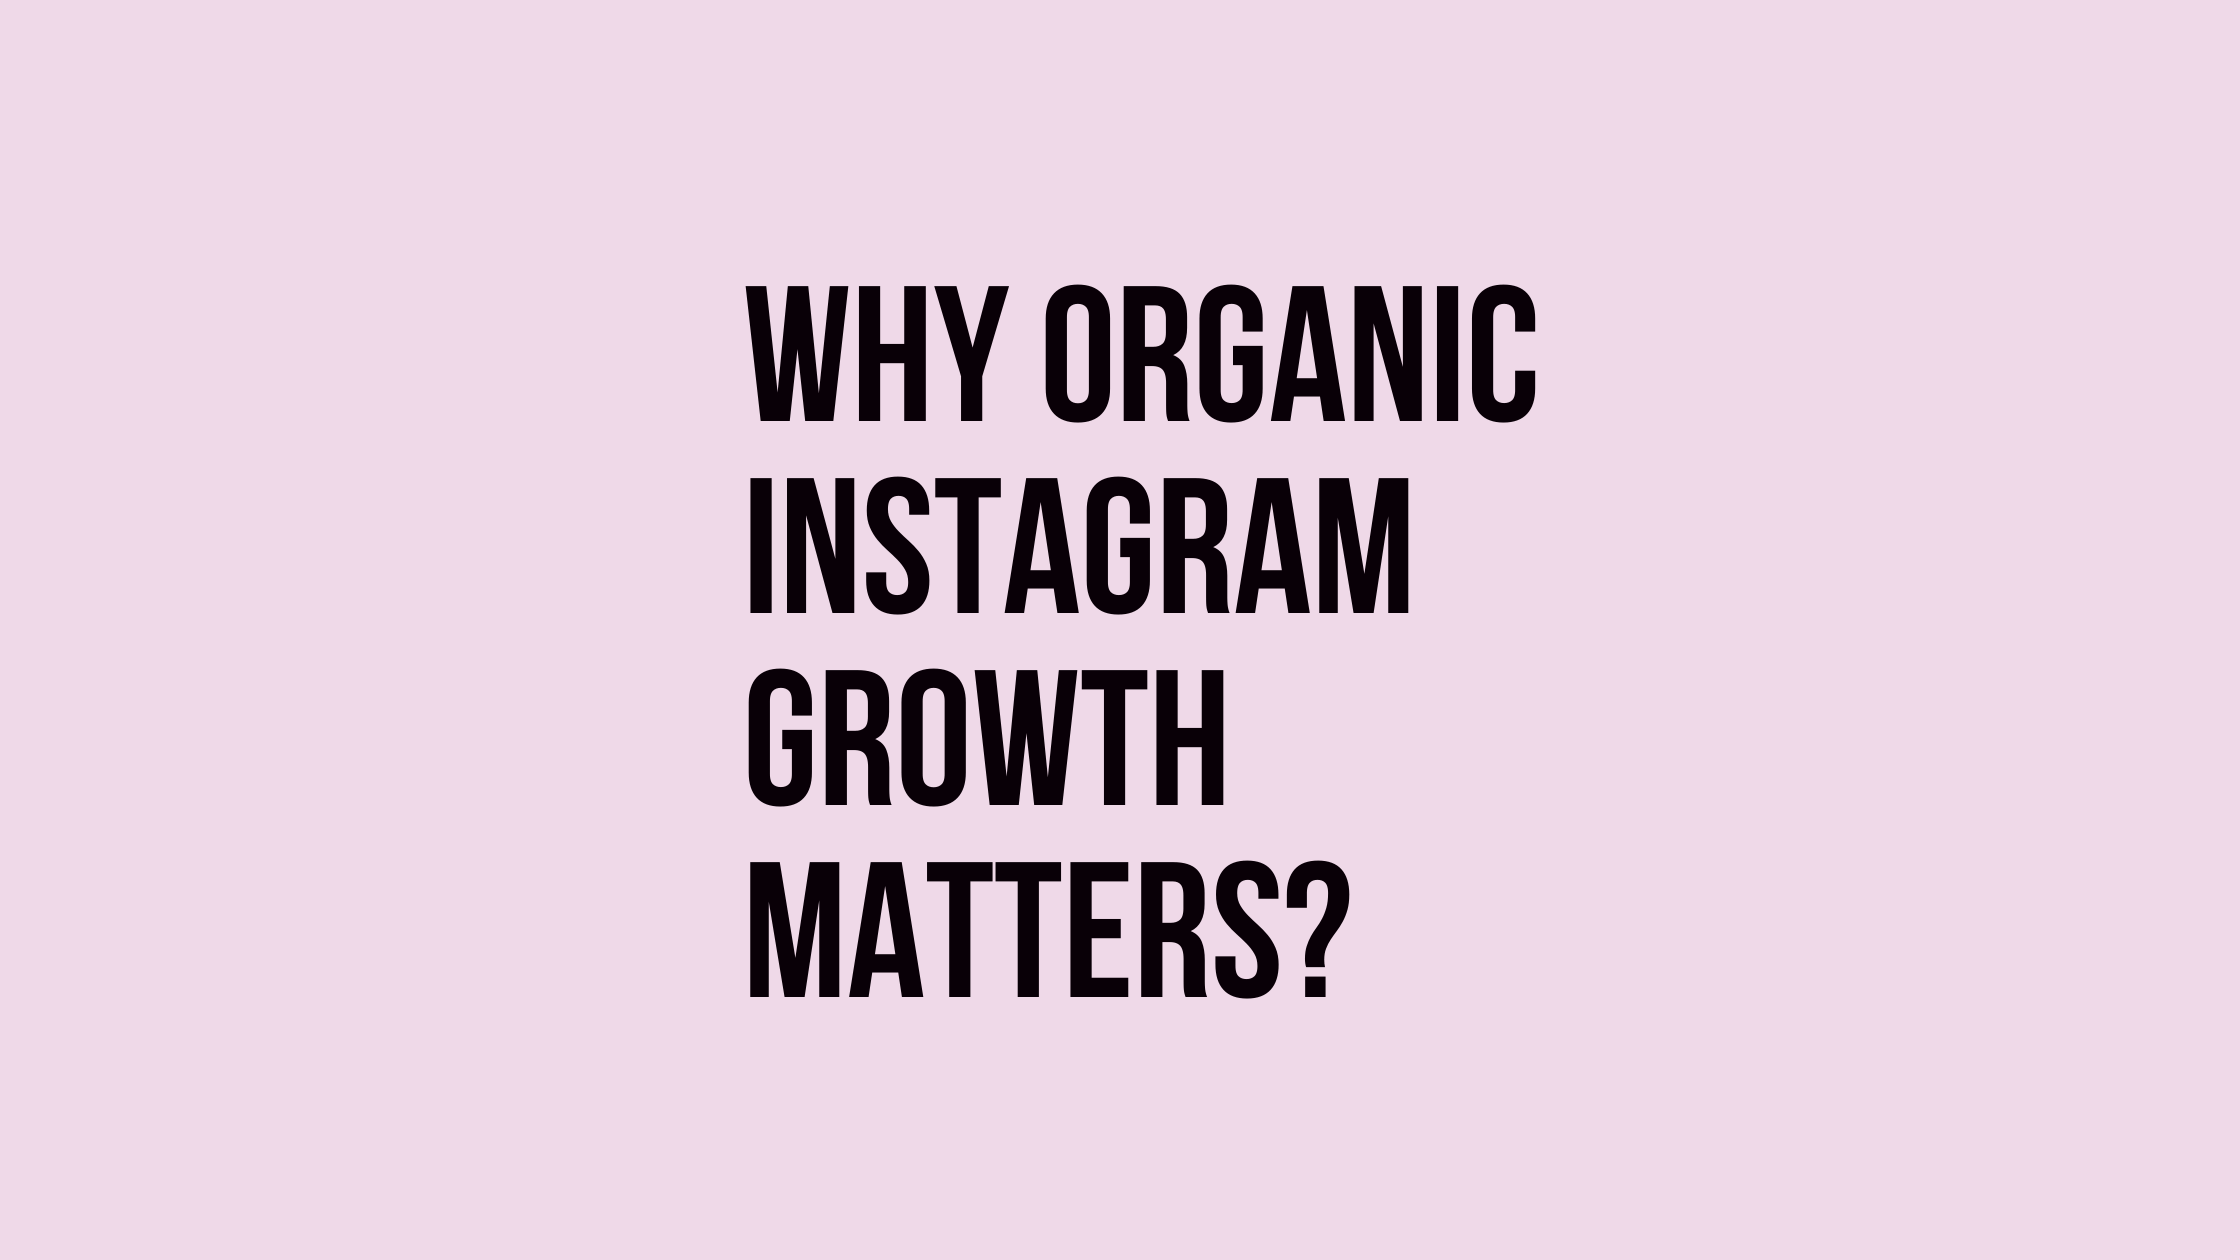 Why Organic Instagram Growth Matters